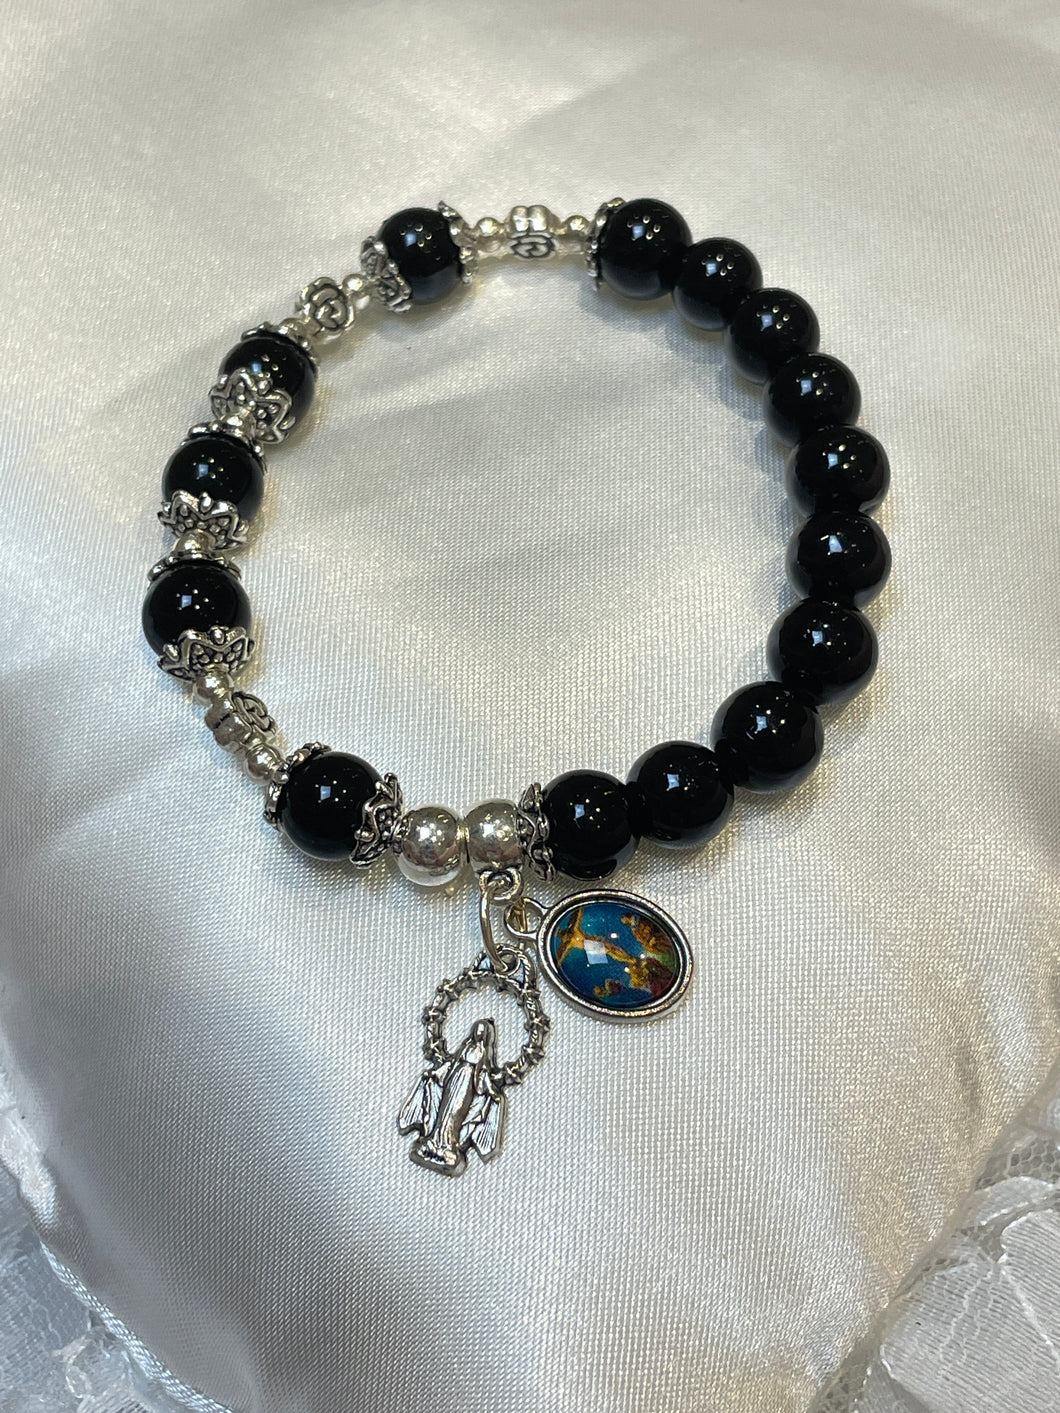 Black Gemstone Rosary Bracelet with Our Lady of Grace and Crucified Jesus Image Charms